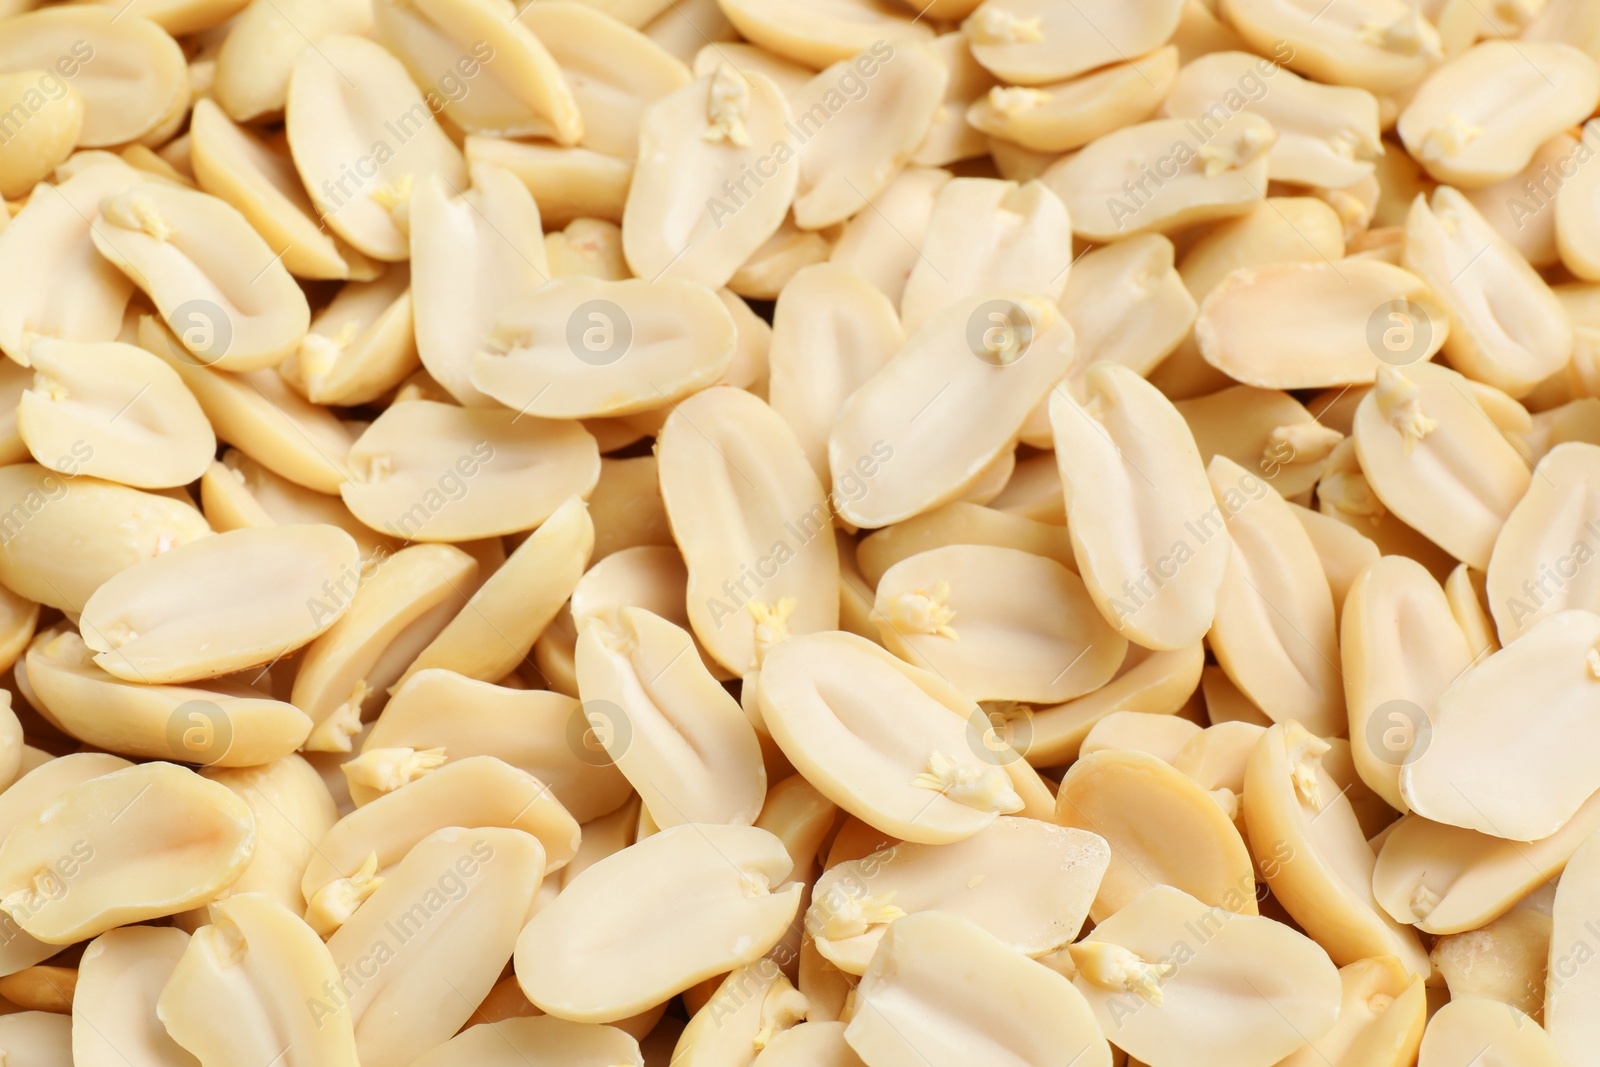 Photo of Fresh peeled peanuts as background, closeup view